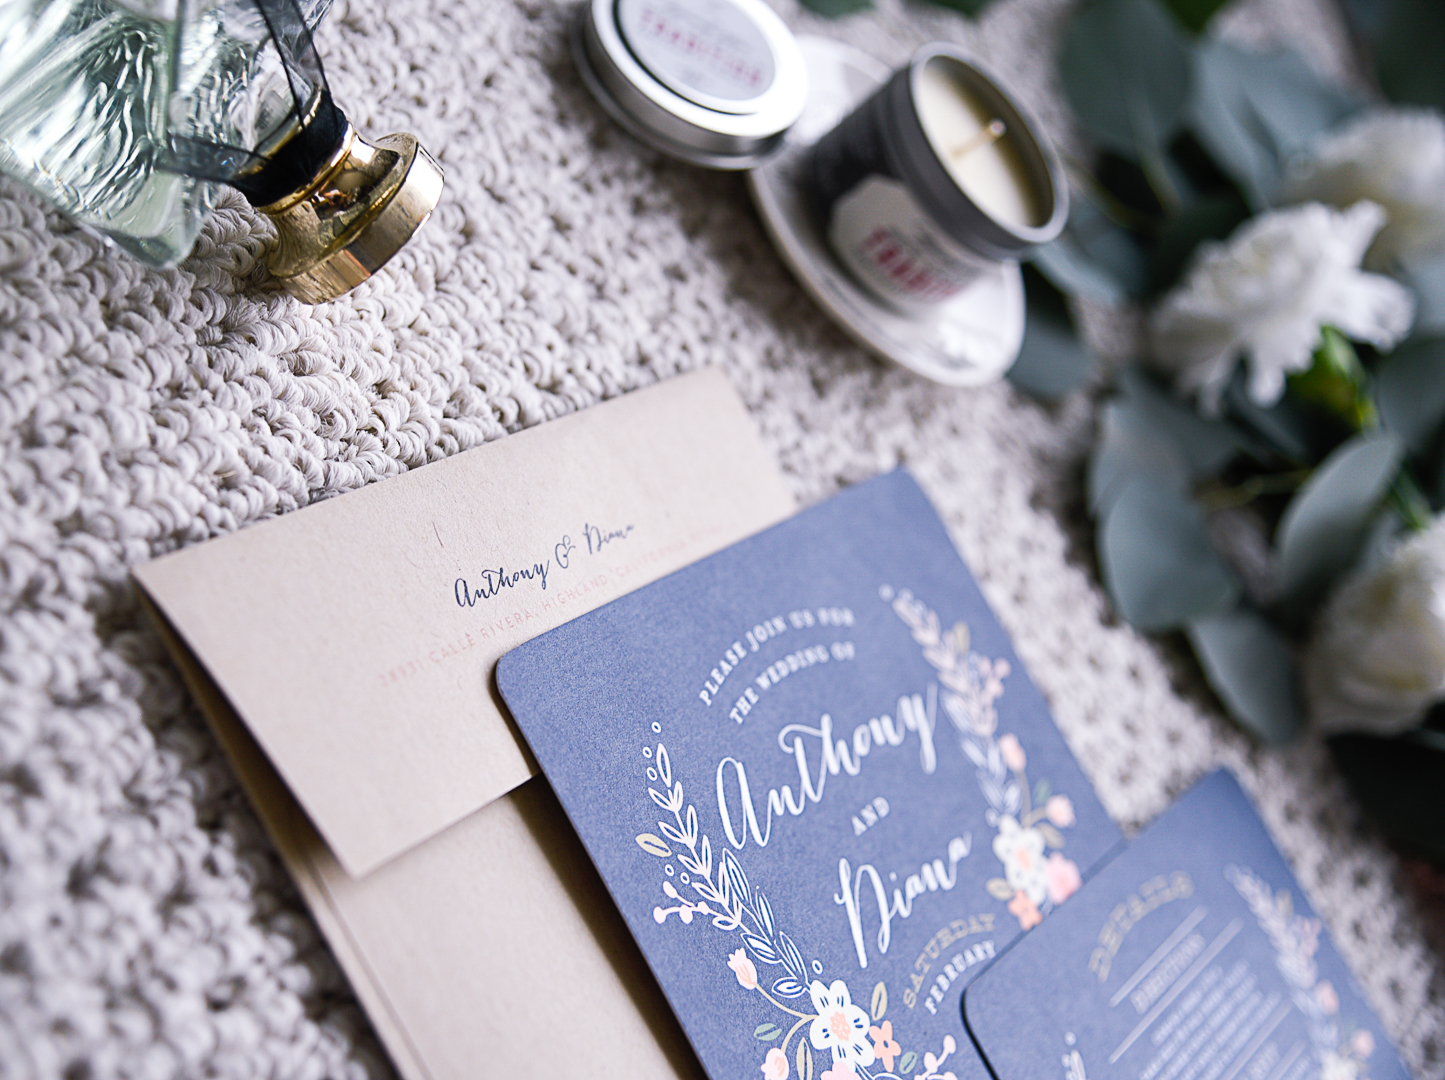 Floral themed wedding invites for a rustic chic wedding theme! 